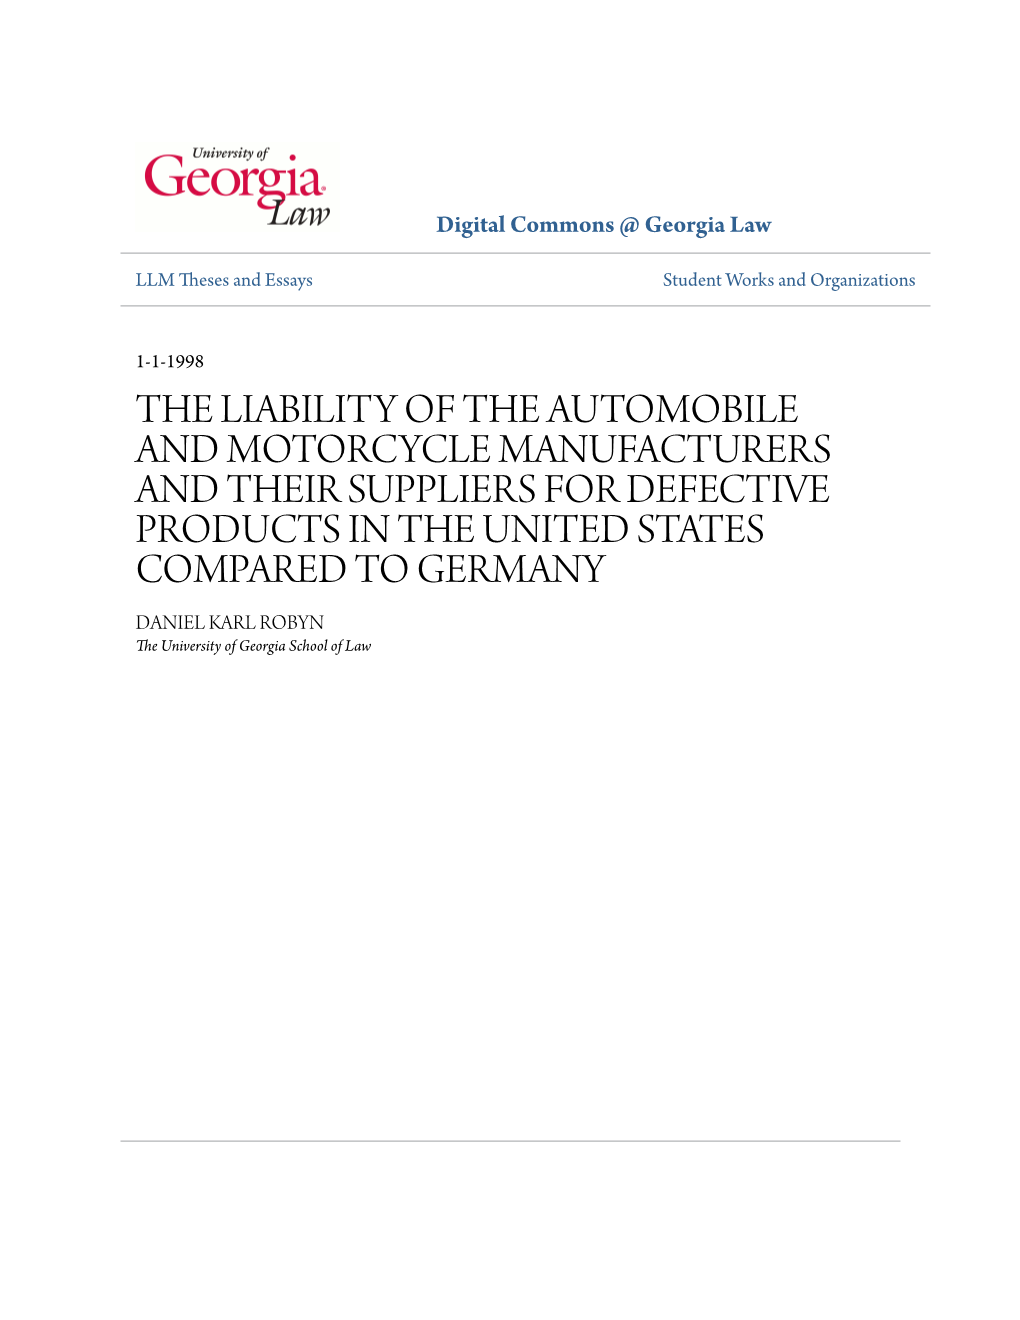 The Liability of the Automobile and Motorcycle